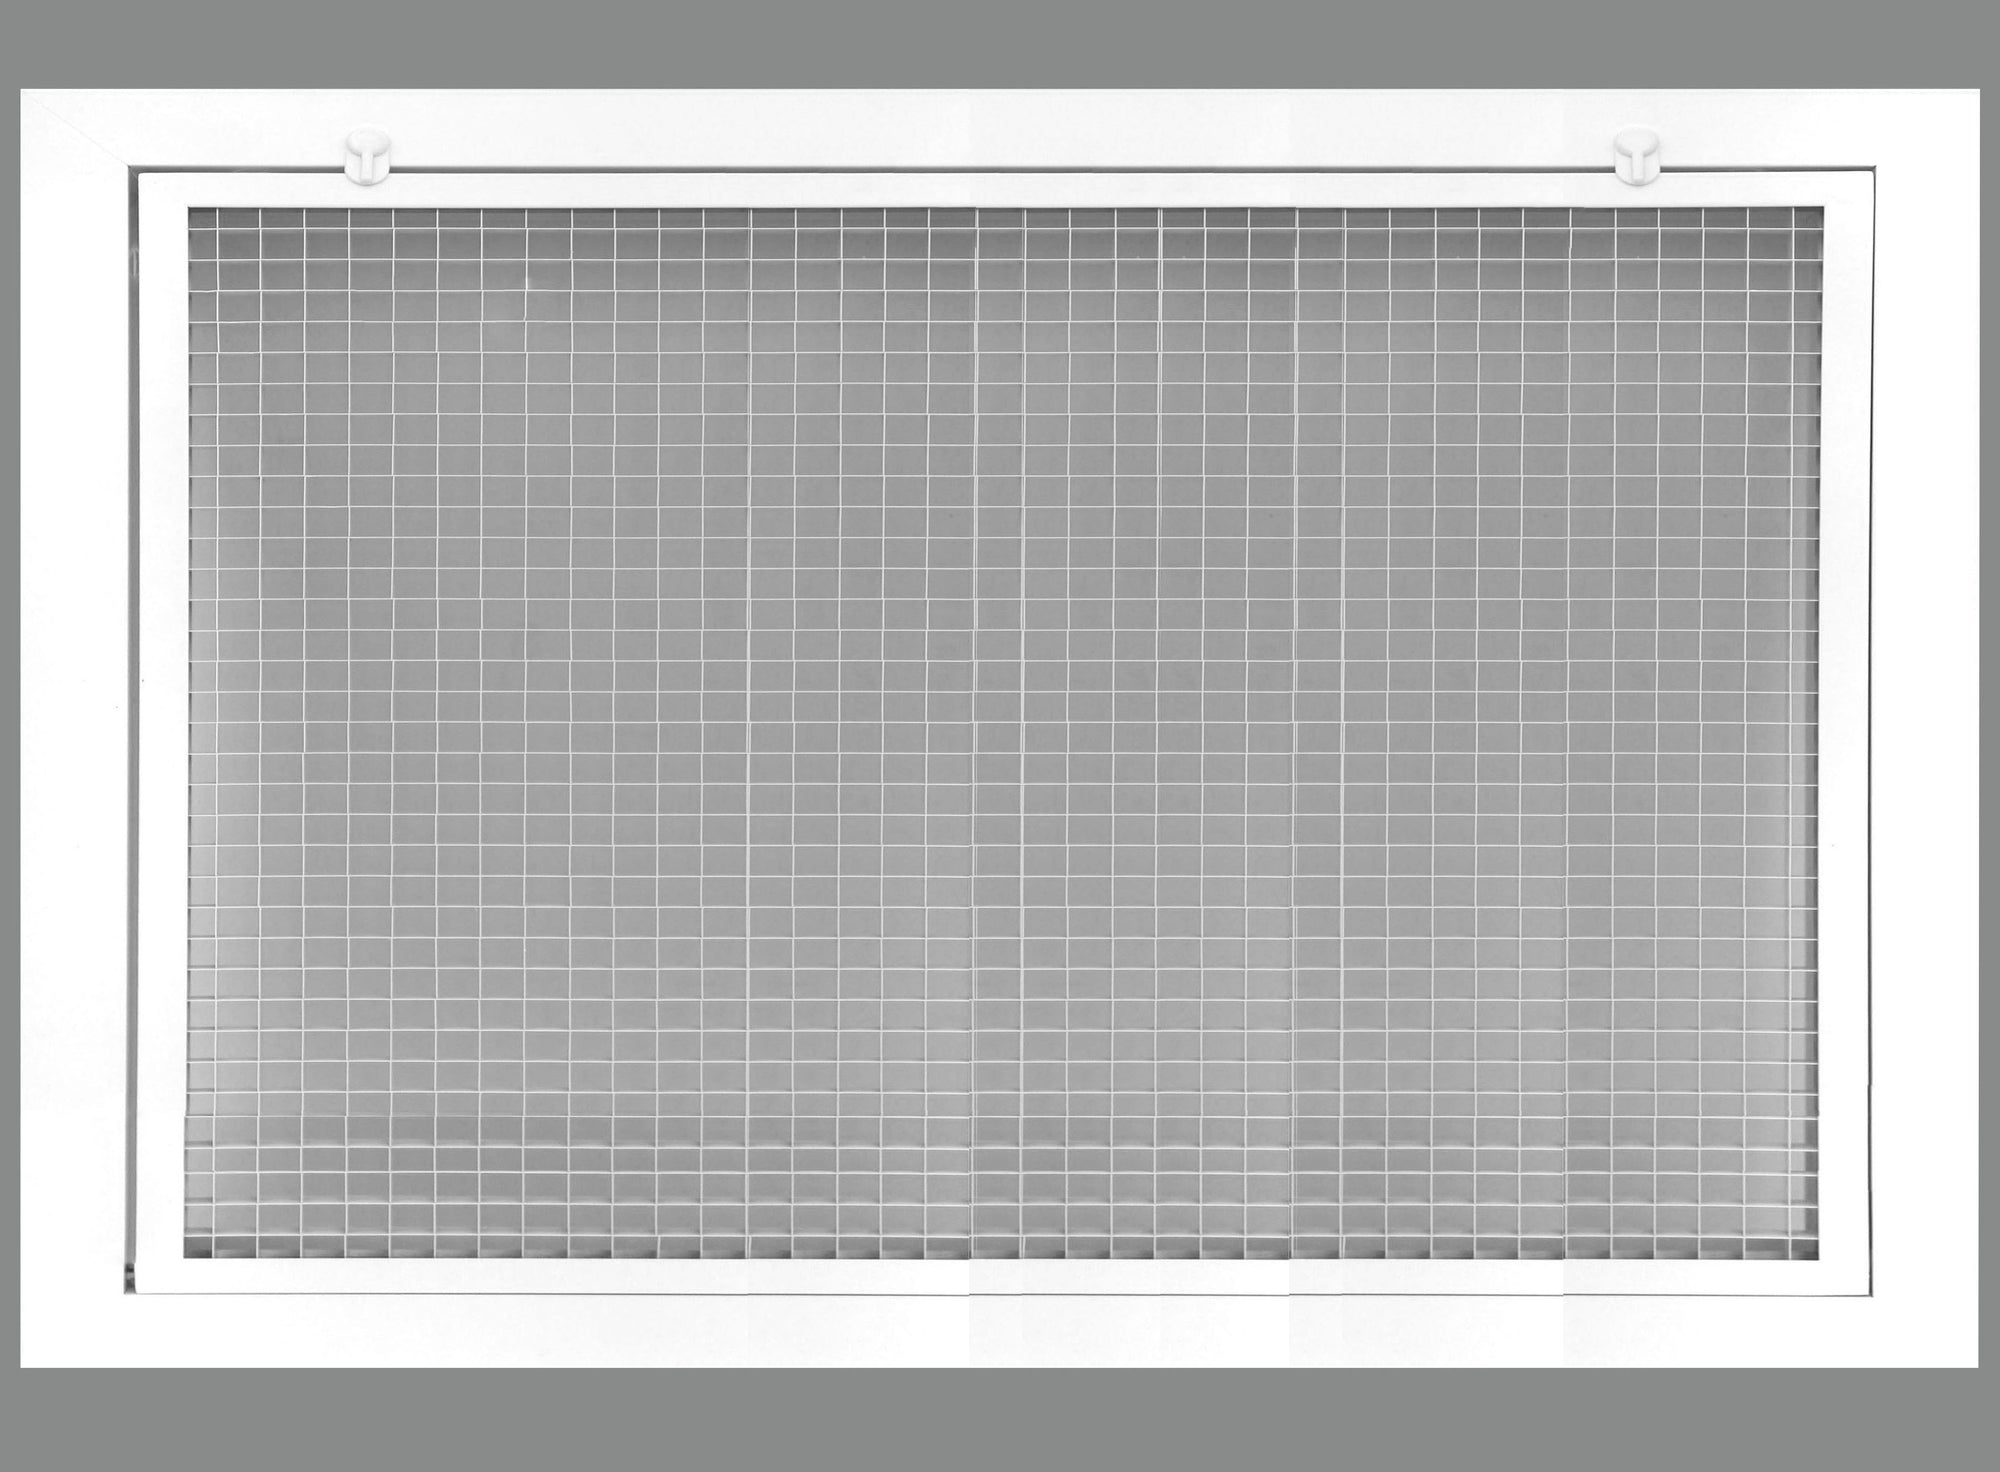 36" x 30" Cube Core Eggcrate Return Air Filter Grille for 1" Filter